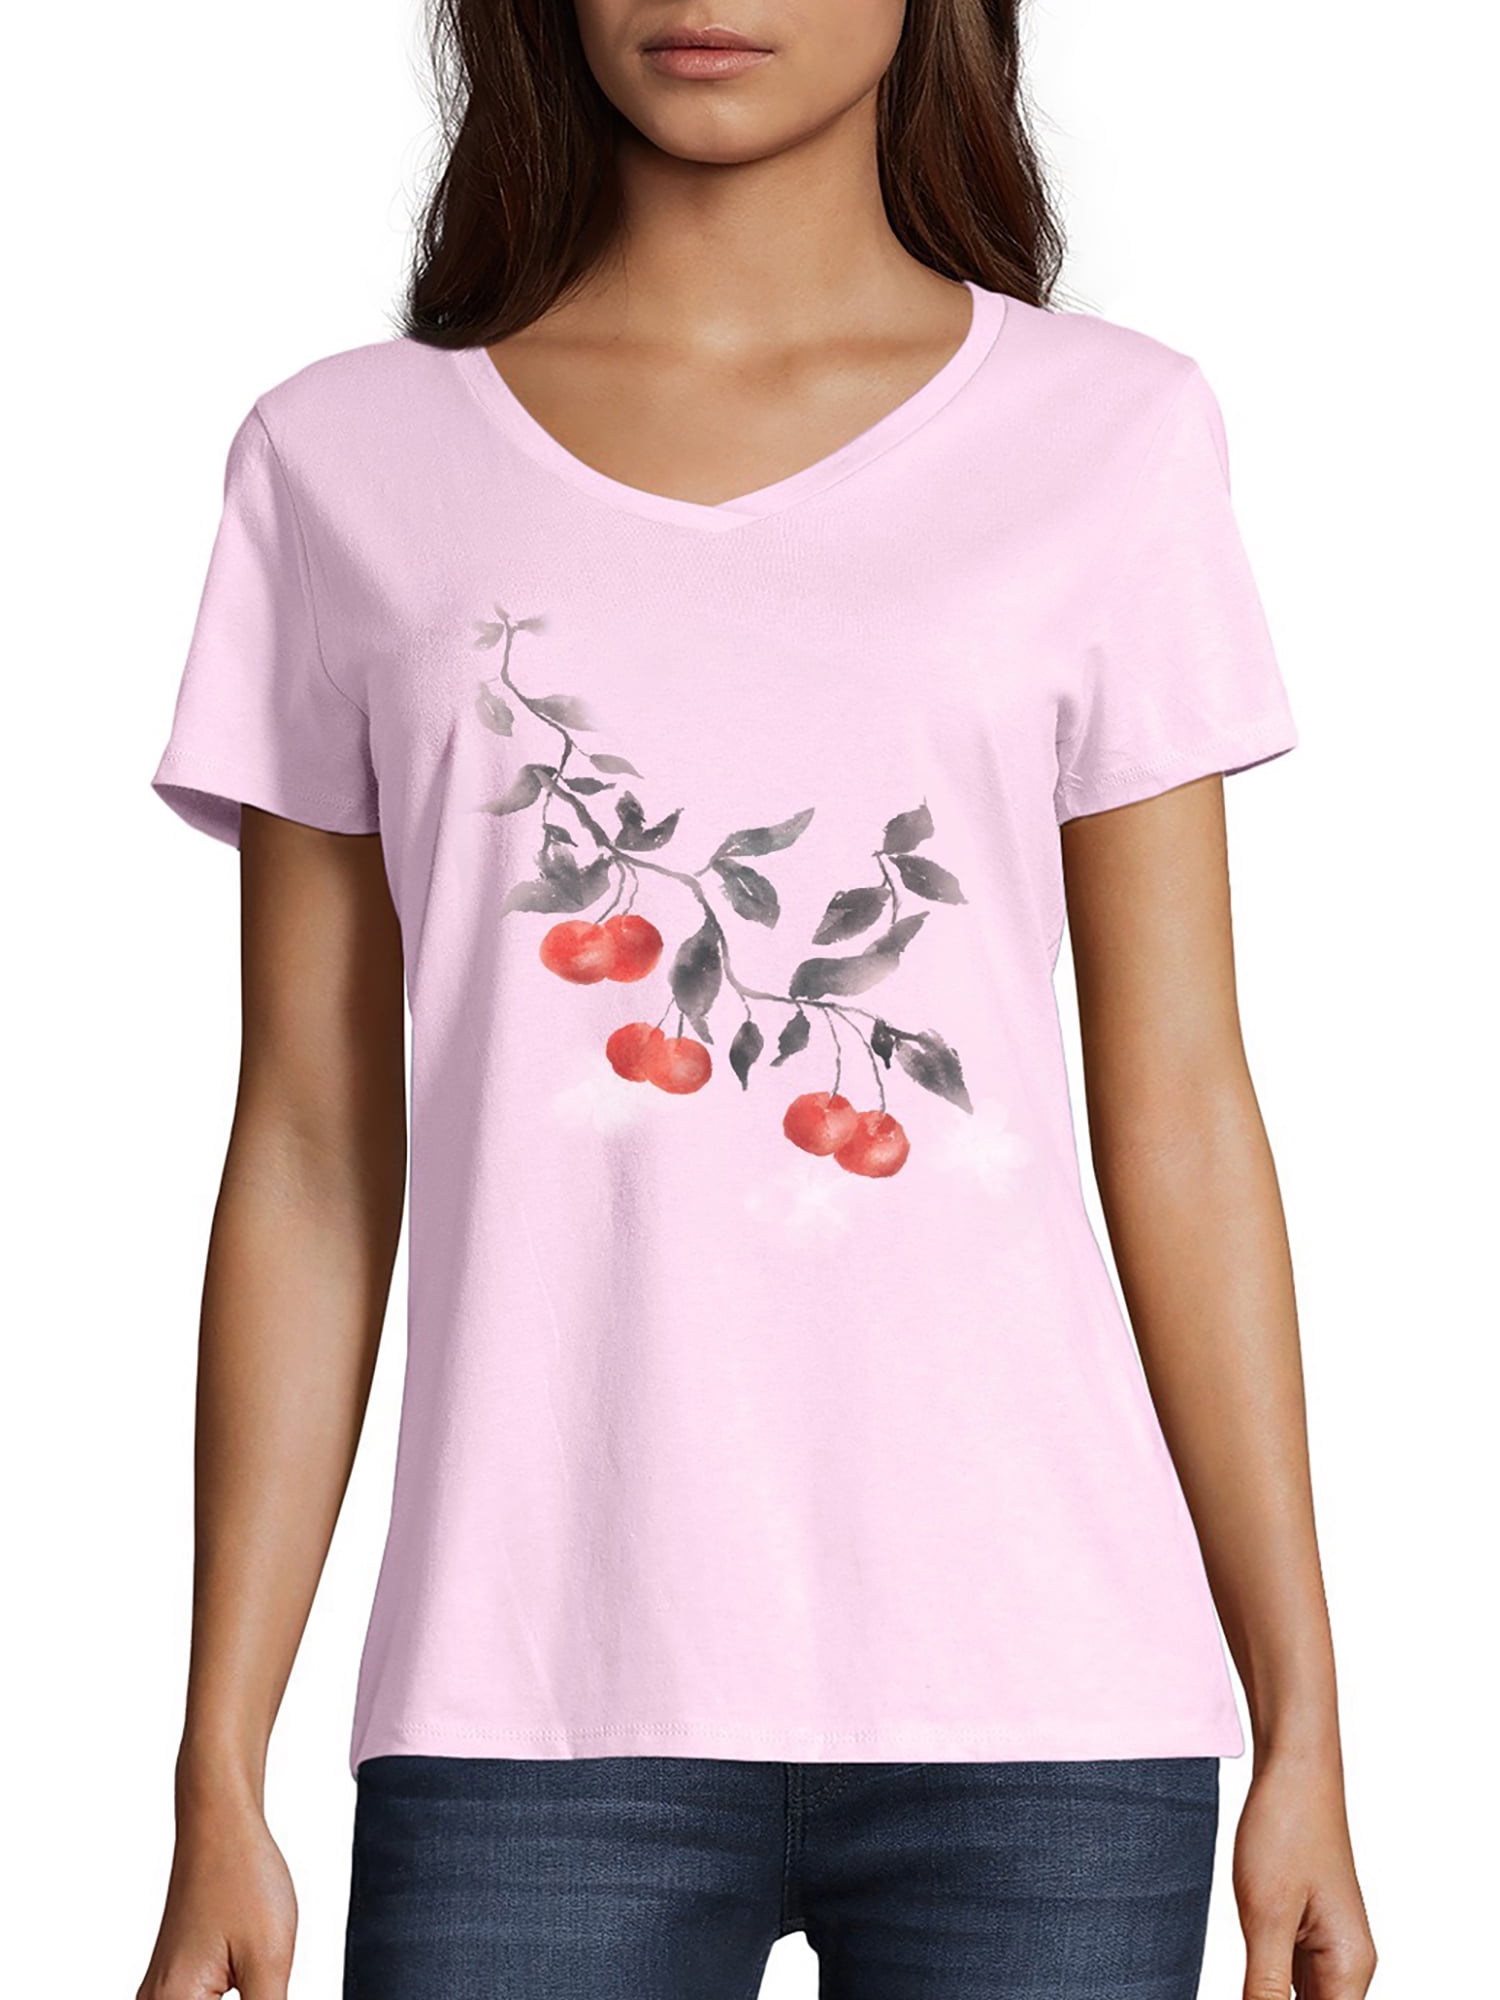 Nature Womens Casual T Shirts Cherry Blossom Floral Summer Tops Small